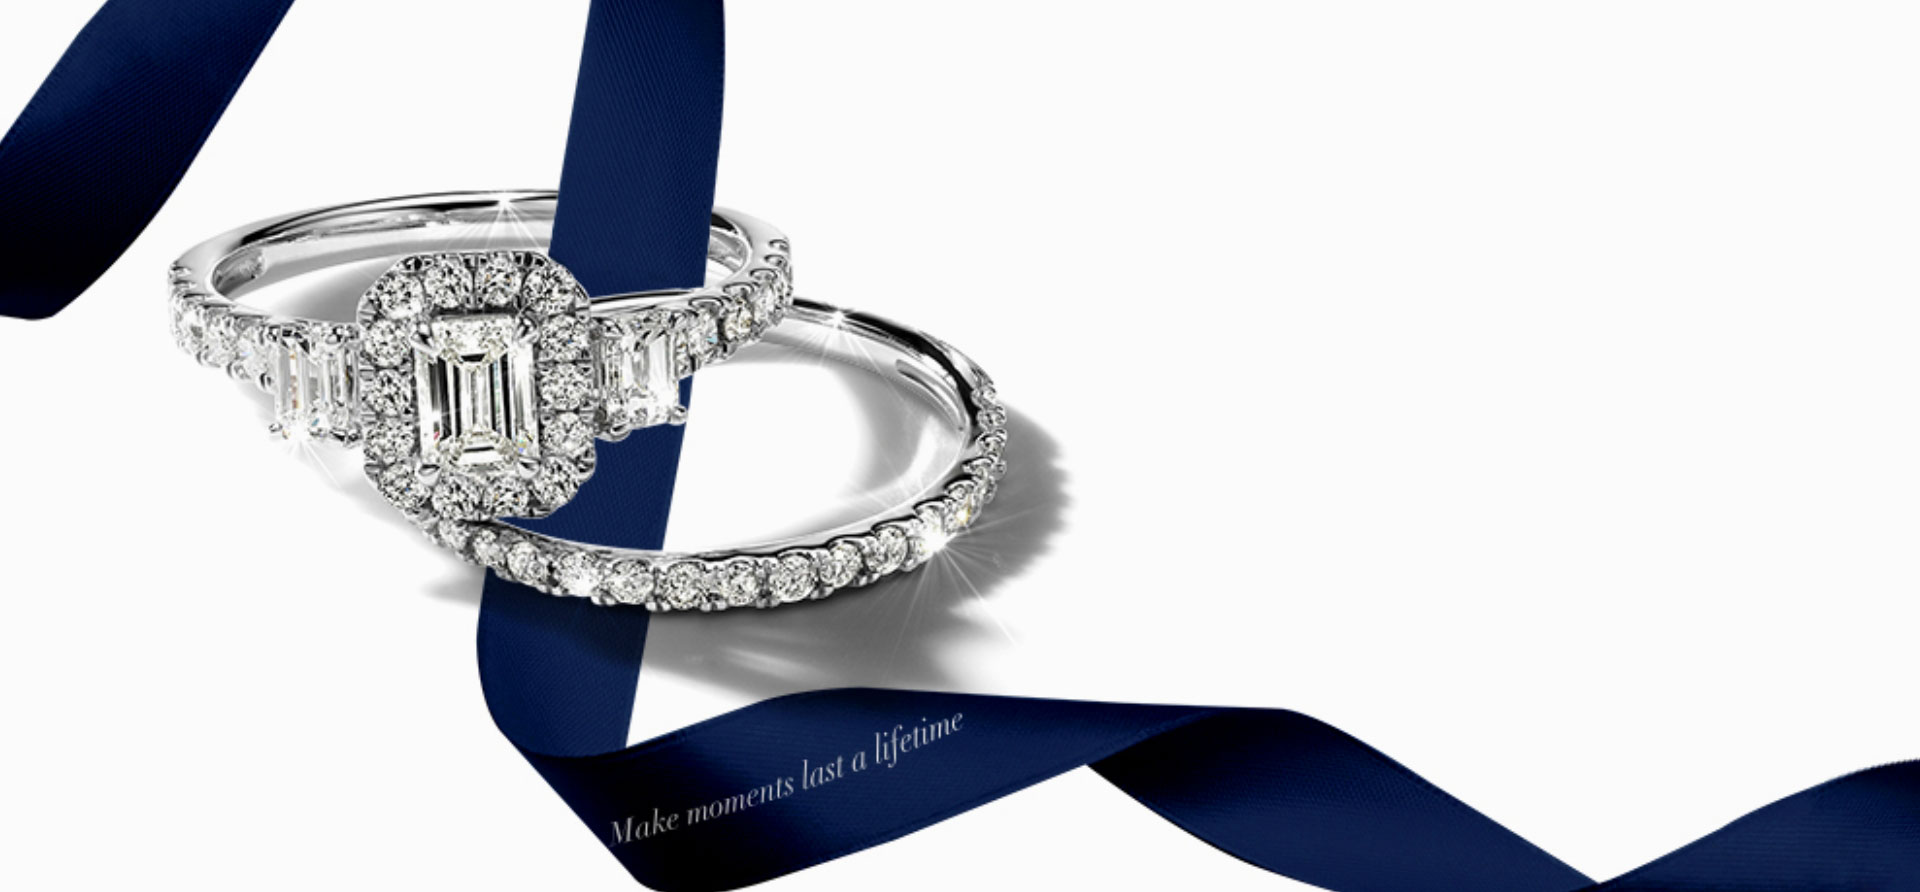 Brilliant Moments engagement ring and wedding band on a blue ribbon. Shop all Brilliant Moments 14K Gold and Diamond jewelry.